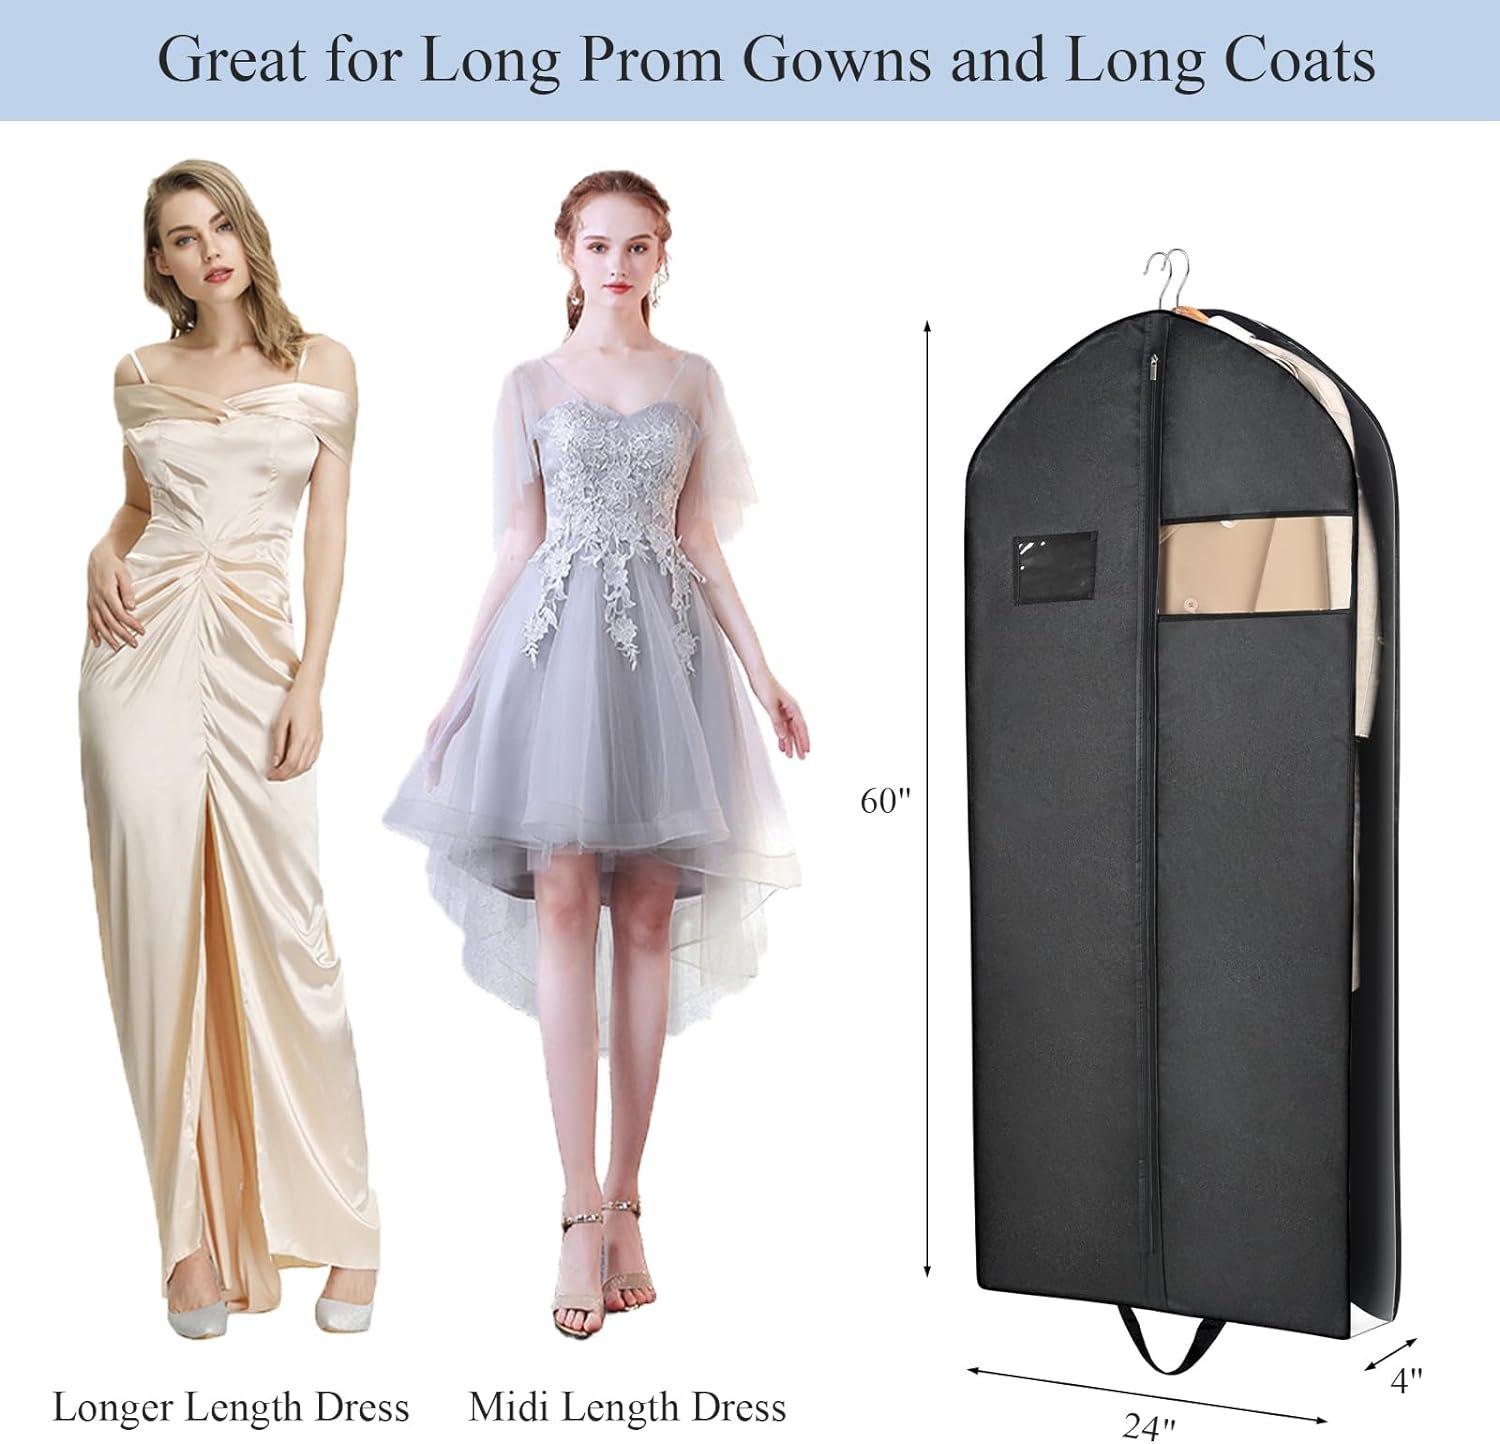 SORON 60 Dress Bags for Gowns Long for Car Traveling, 5-Pack Garment Bag for Dresses Long With Visible Design, Foldable Dress Covers for Long Prom Gown, Dresses, Tuxedo, Cosplay Outfits, and More : Home  Kitchen